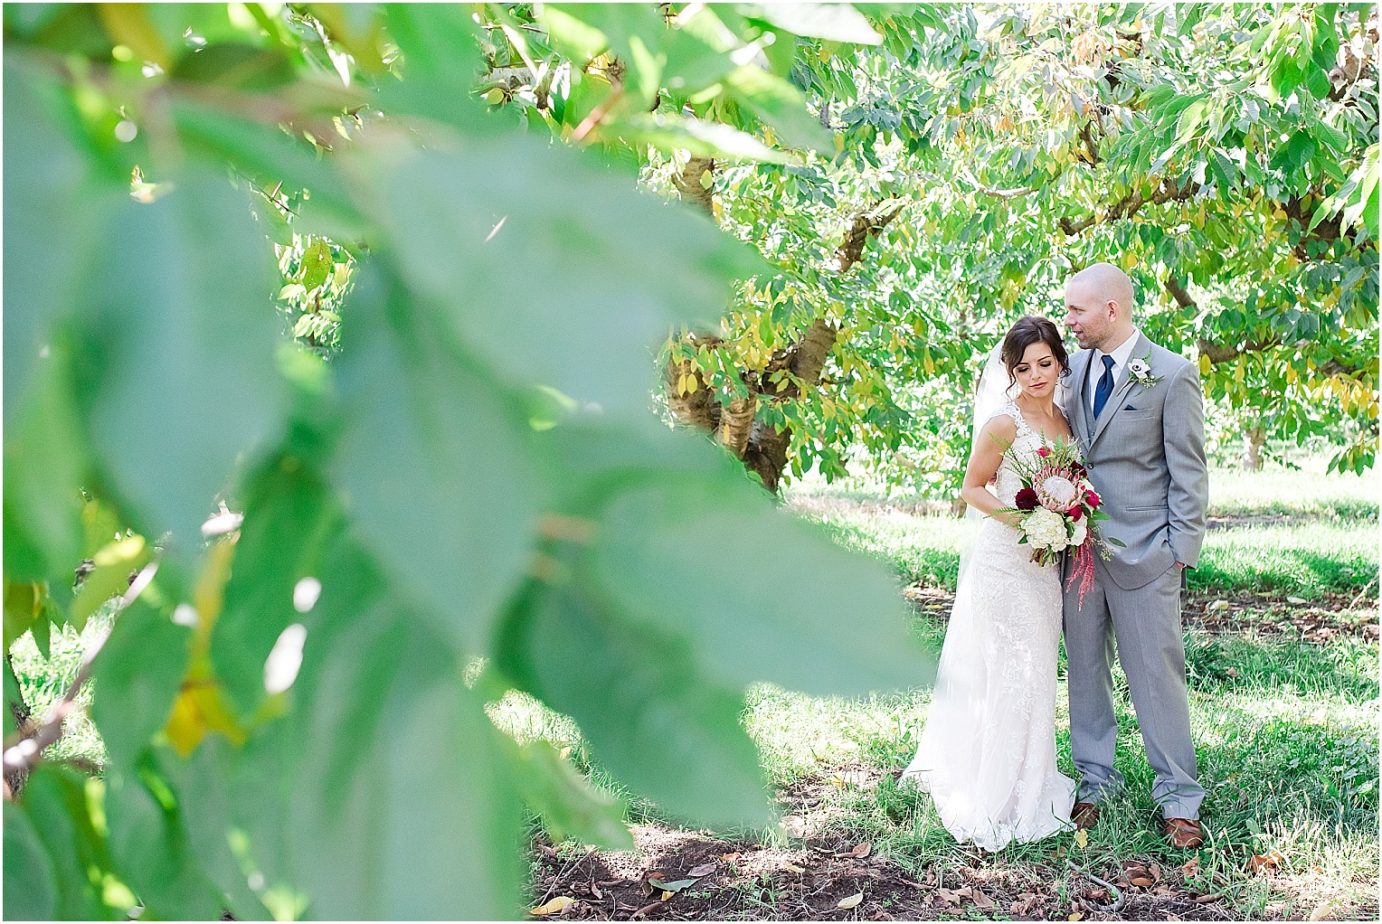 Fontaine Estates Winery Wedding Bride and groom formals photo